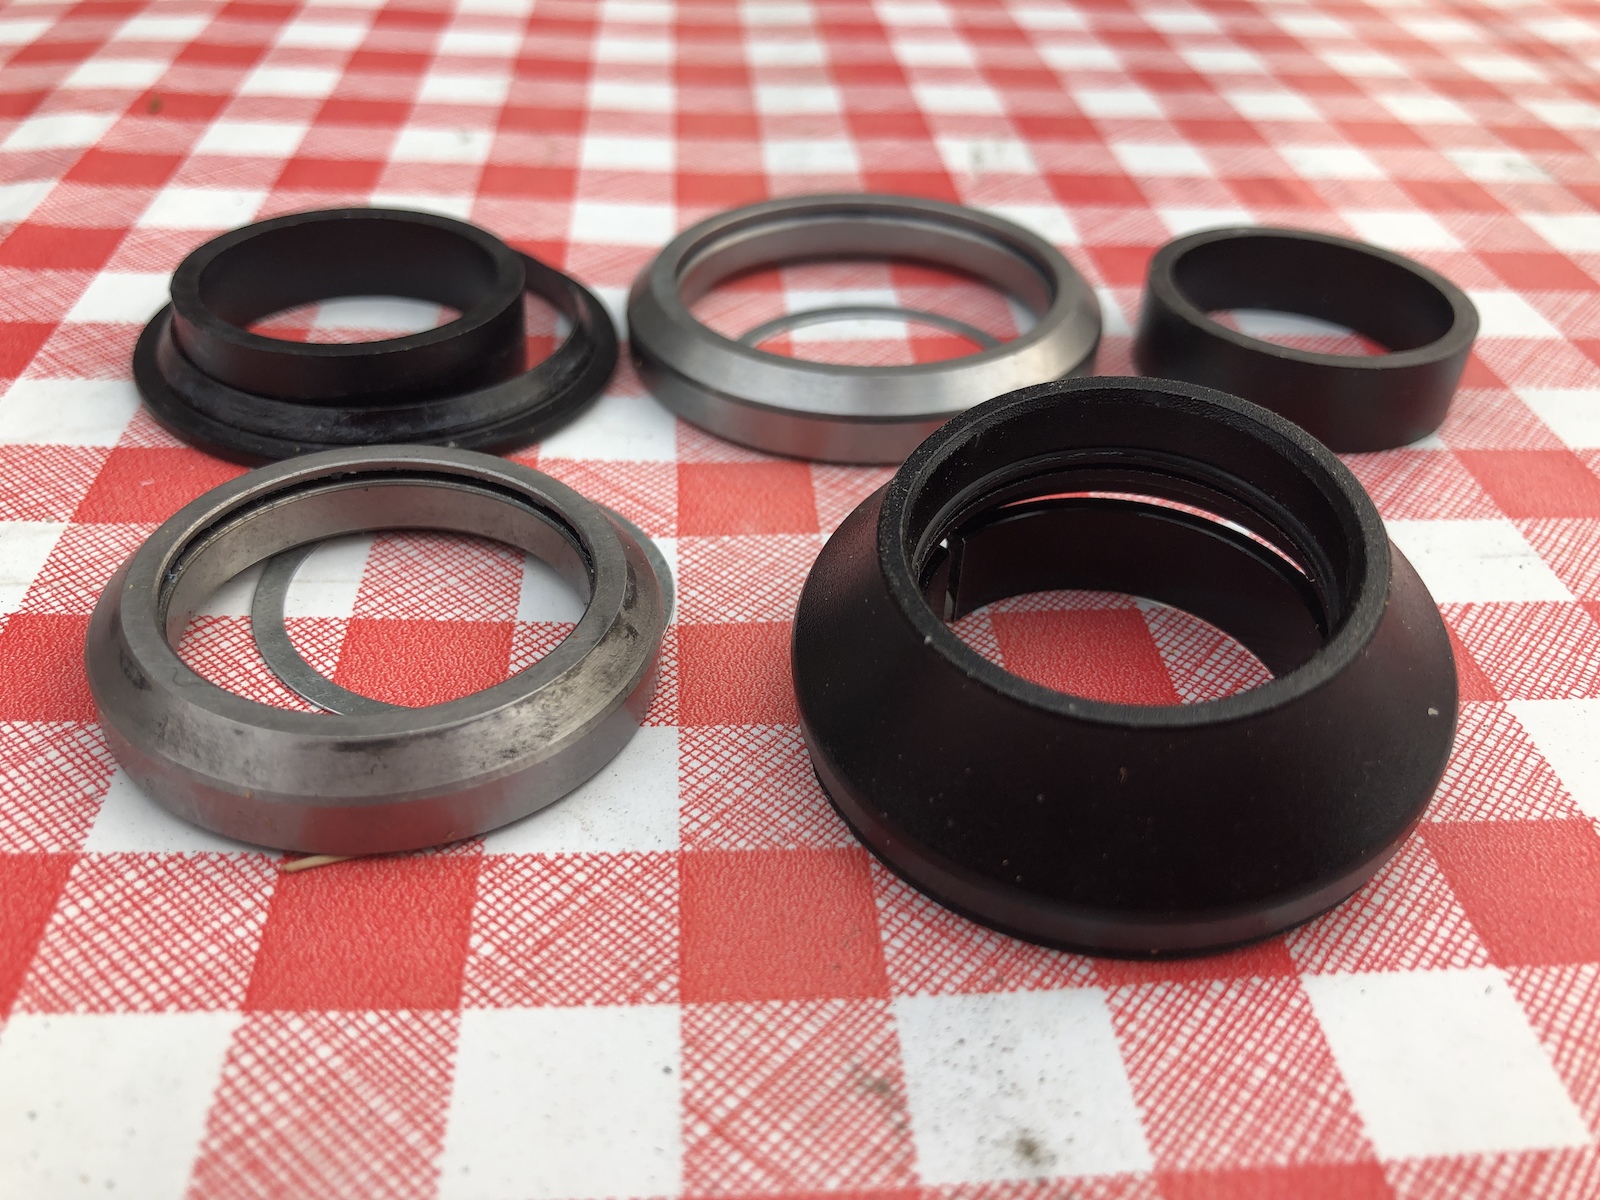 Angular sealed cartridge bearing headset. Came with bike and includes all parts